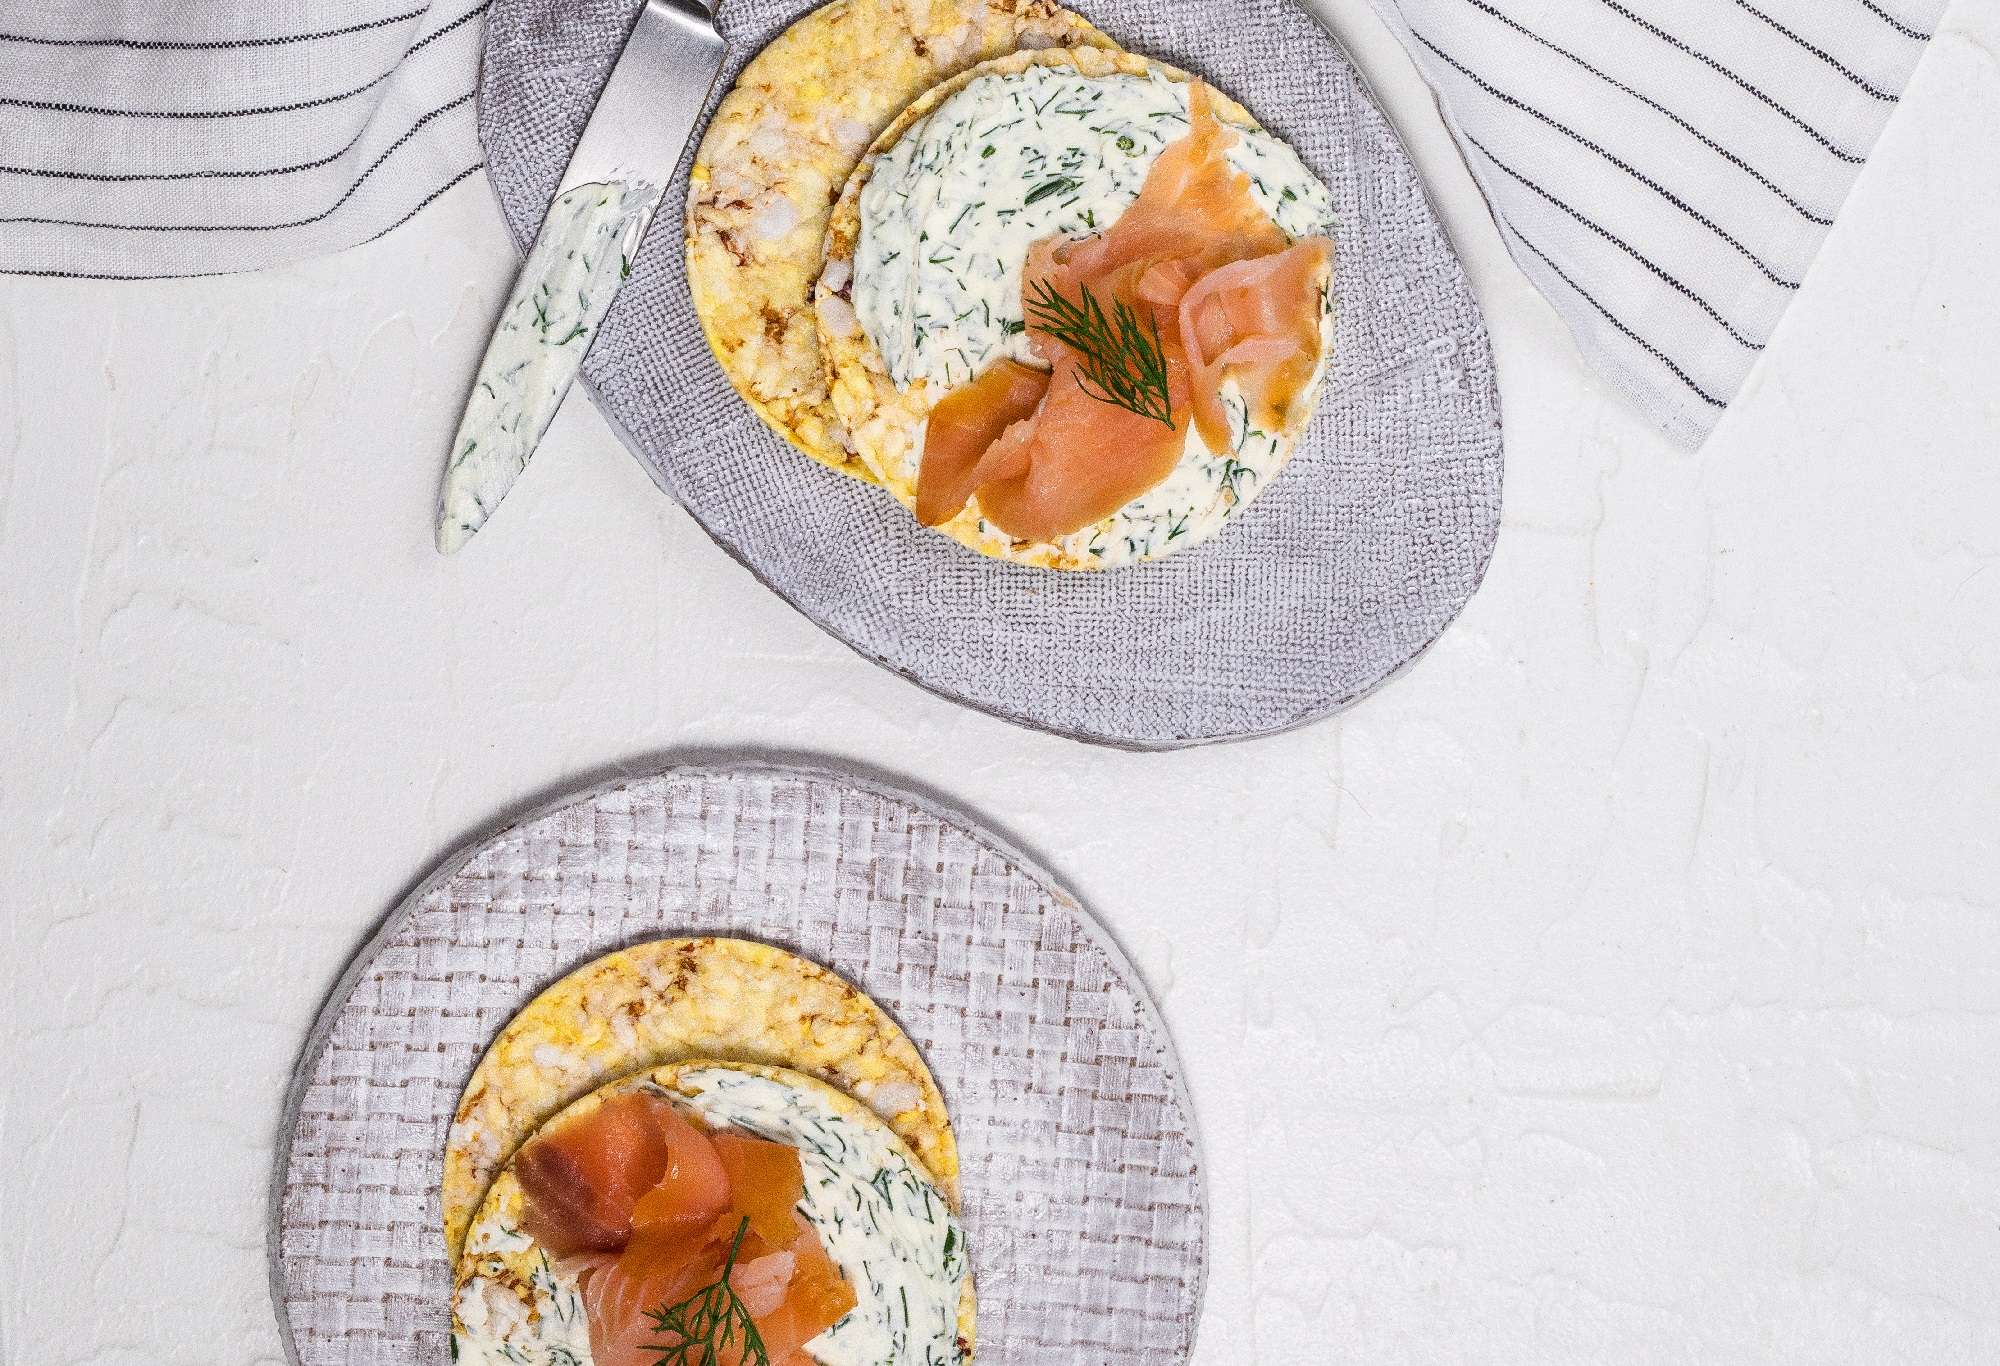 Dill cream cheese with smoked salmon on CORN THINS slices